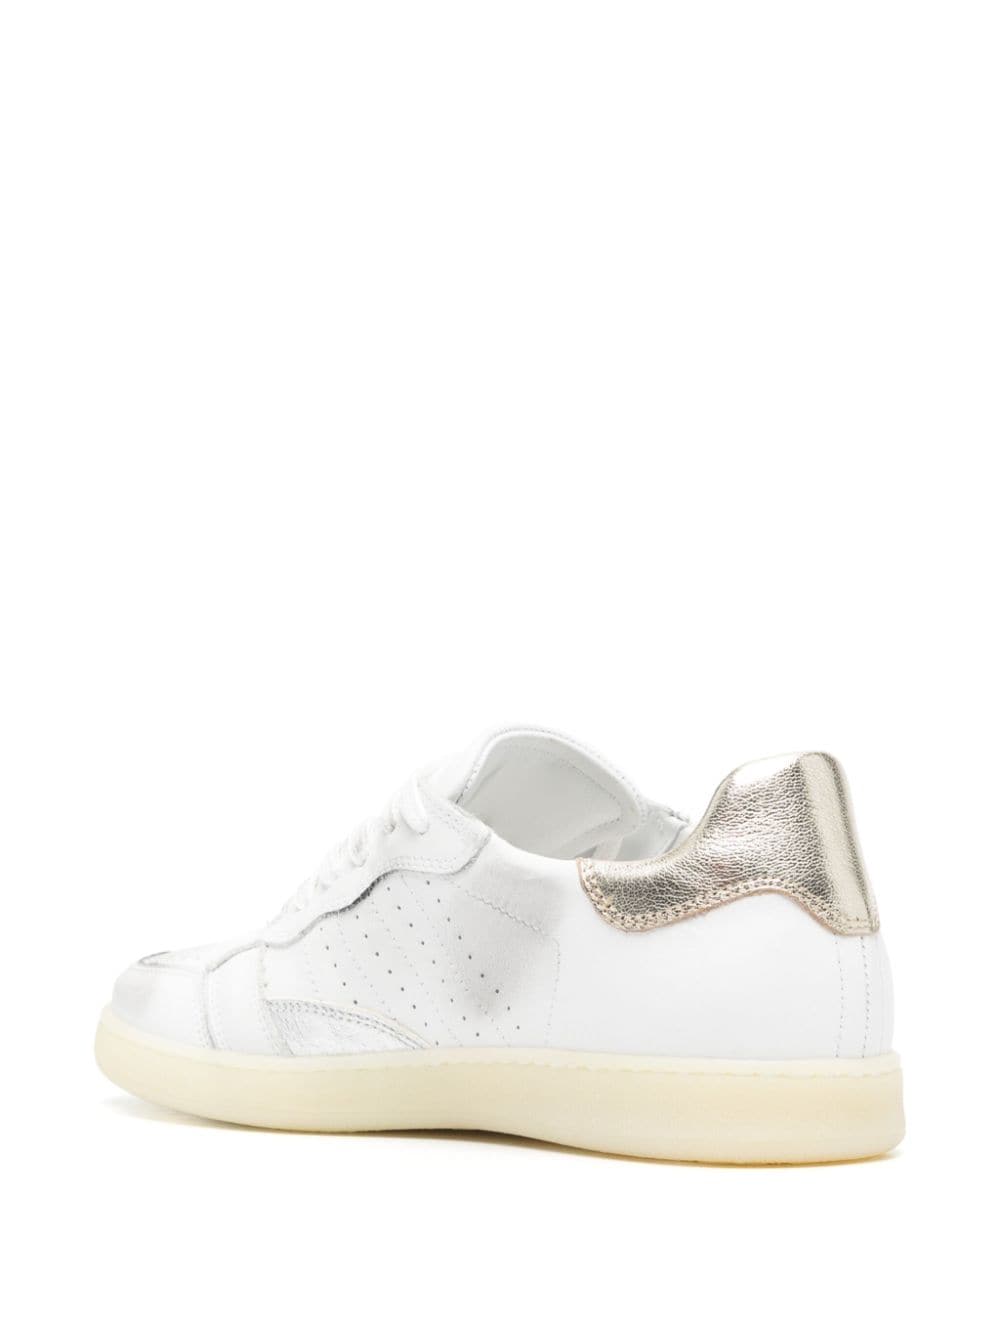 Shop Date Panelled Leather Sneakers In White